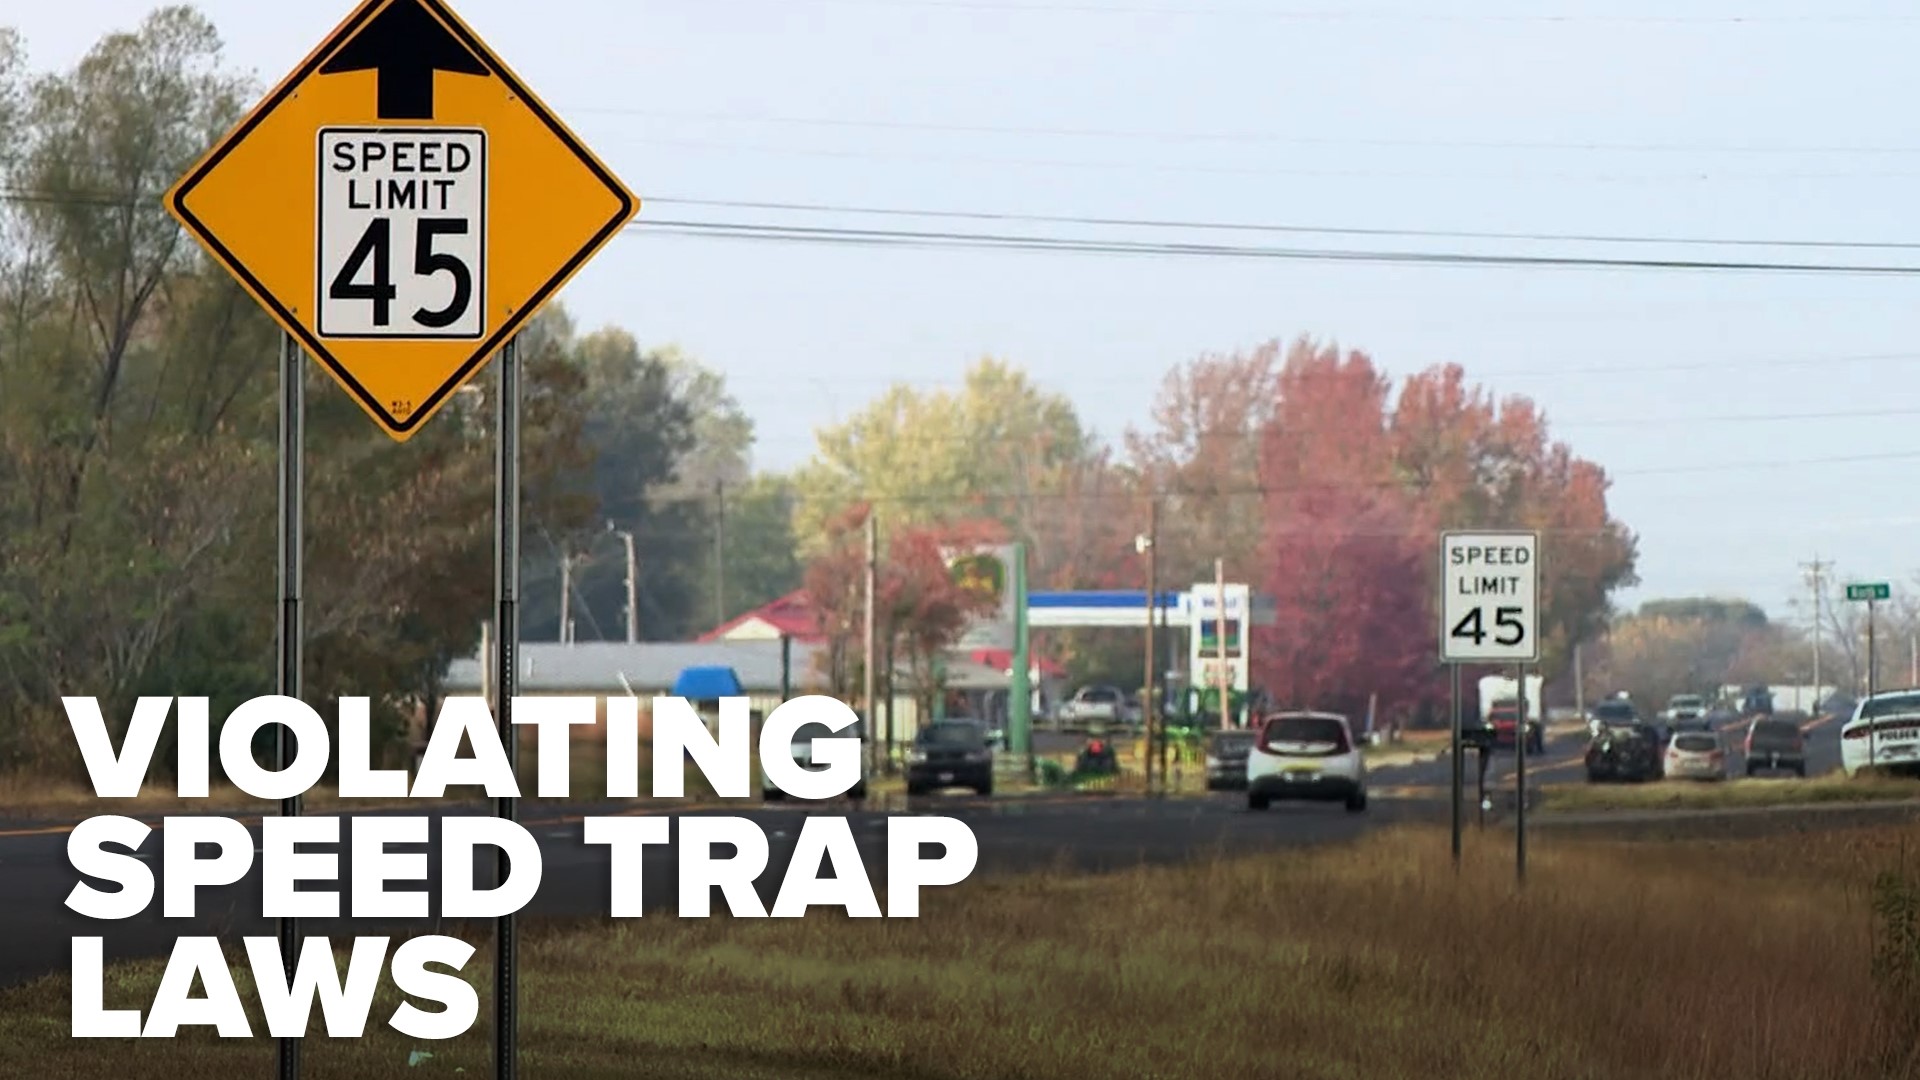 For many in Arkansas, we're aware of the towns that are labeled as speed traps. But the impacts of violating that law can change the way a small town operates.